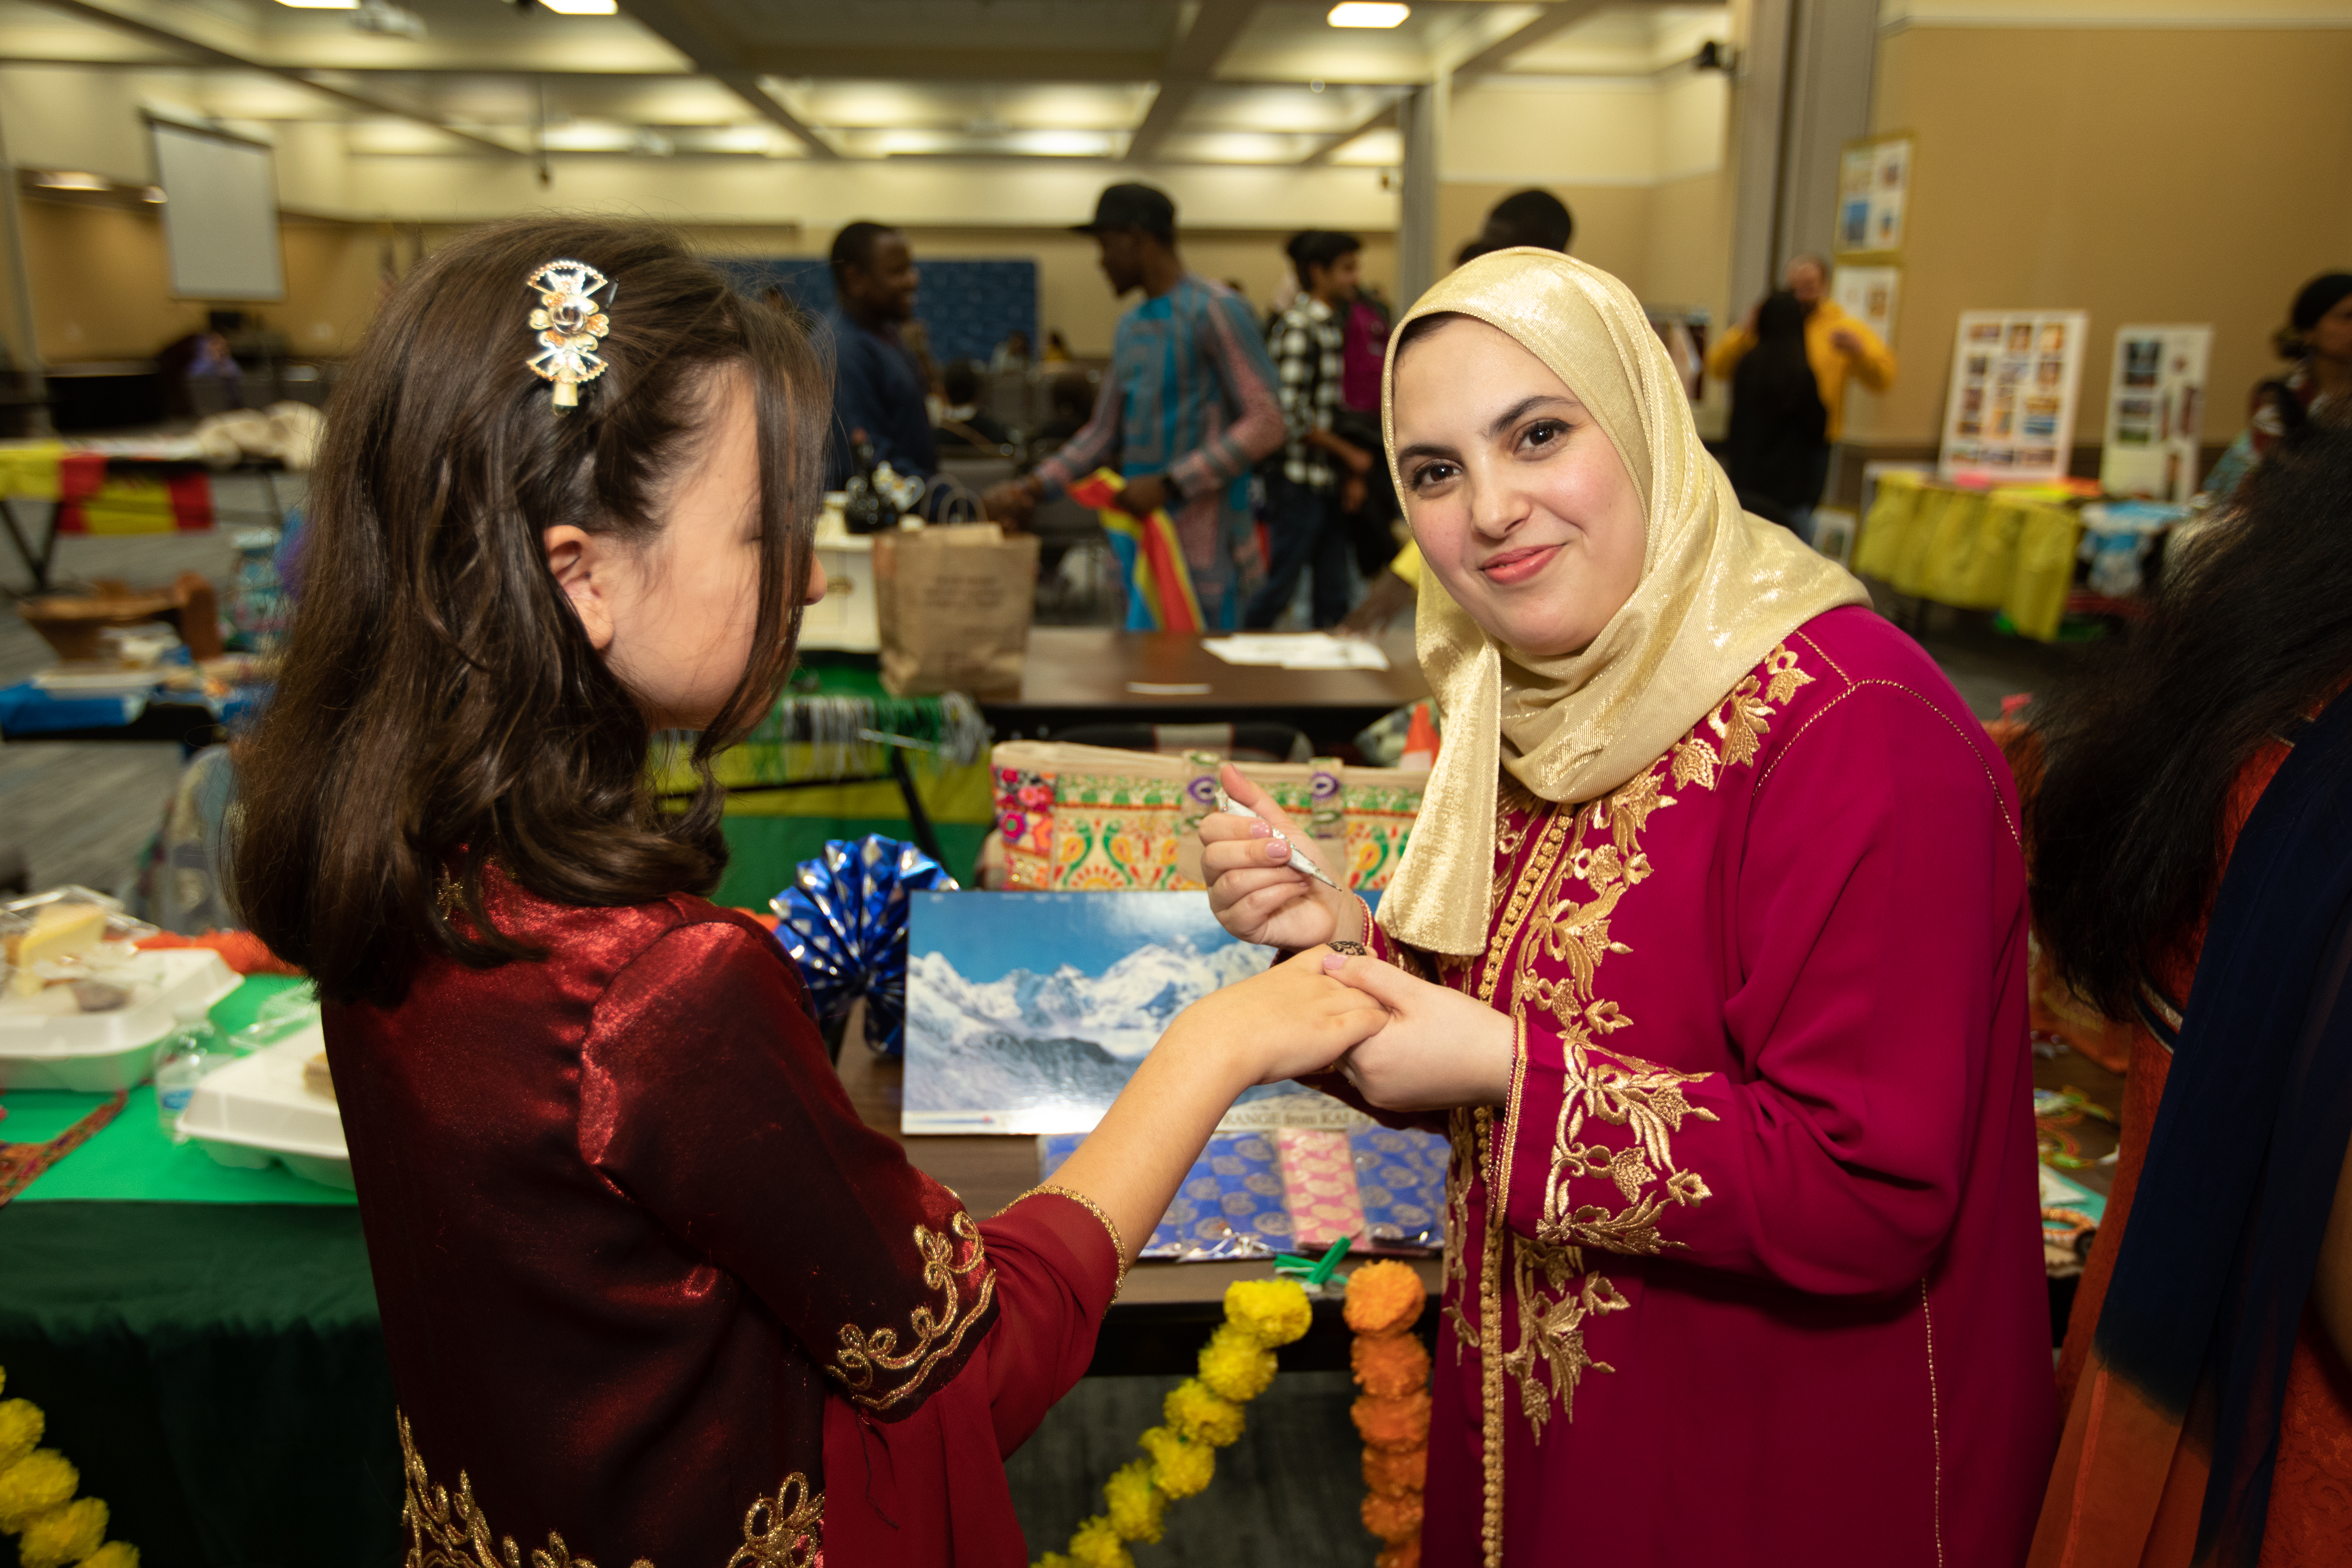 Wake Tech's diversity is celebrated during International Day